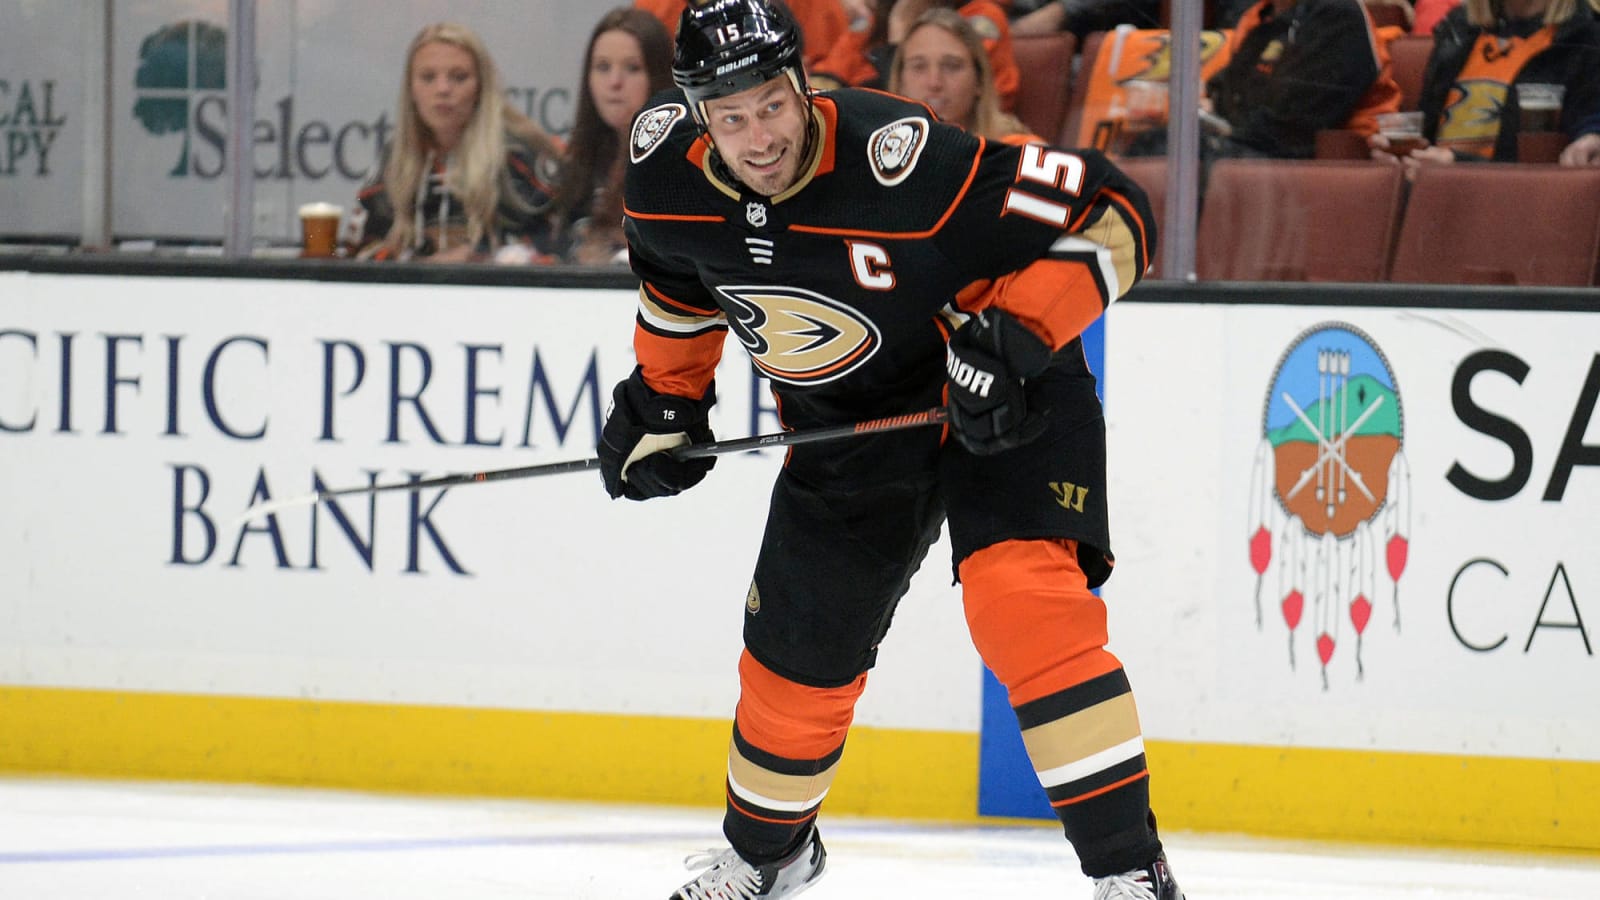 Watch: Ducks’ Ryan Getzlaf takes puck to face, returns to game